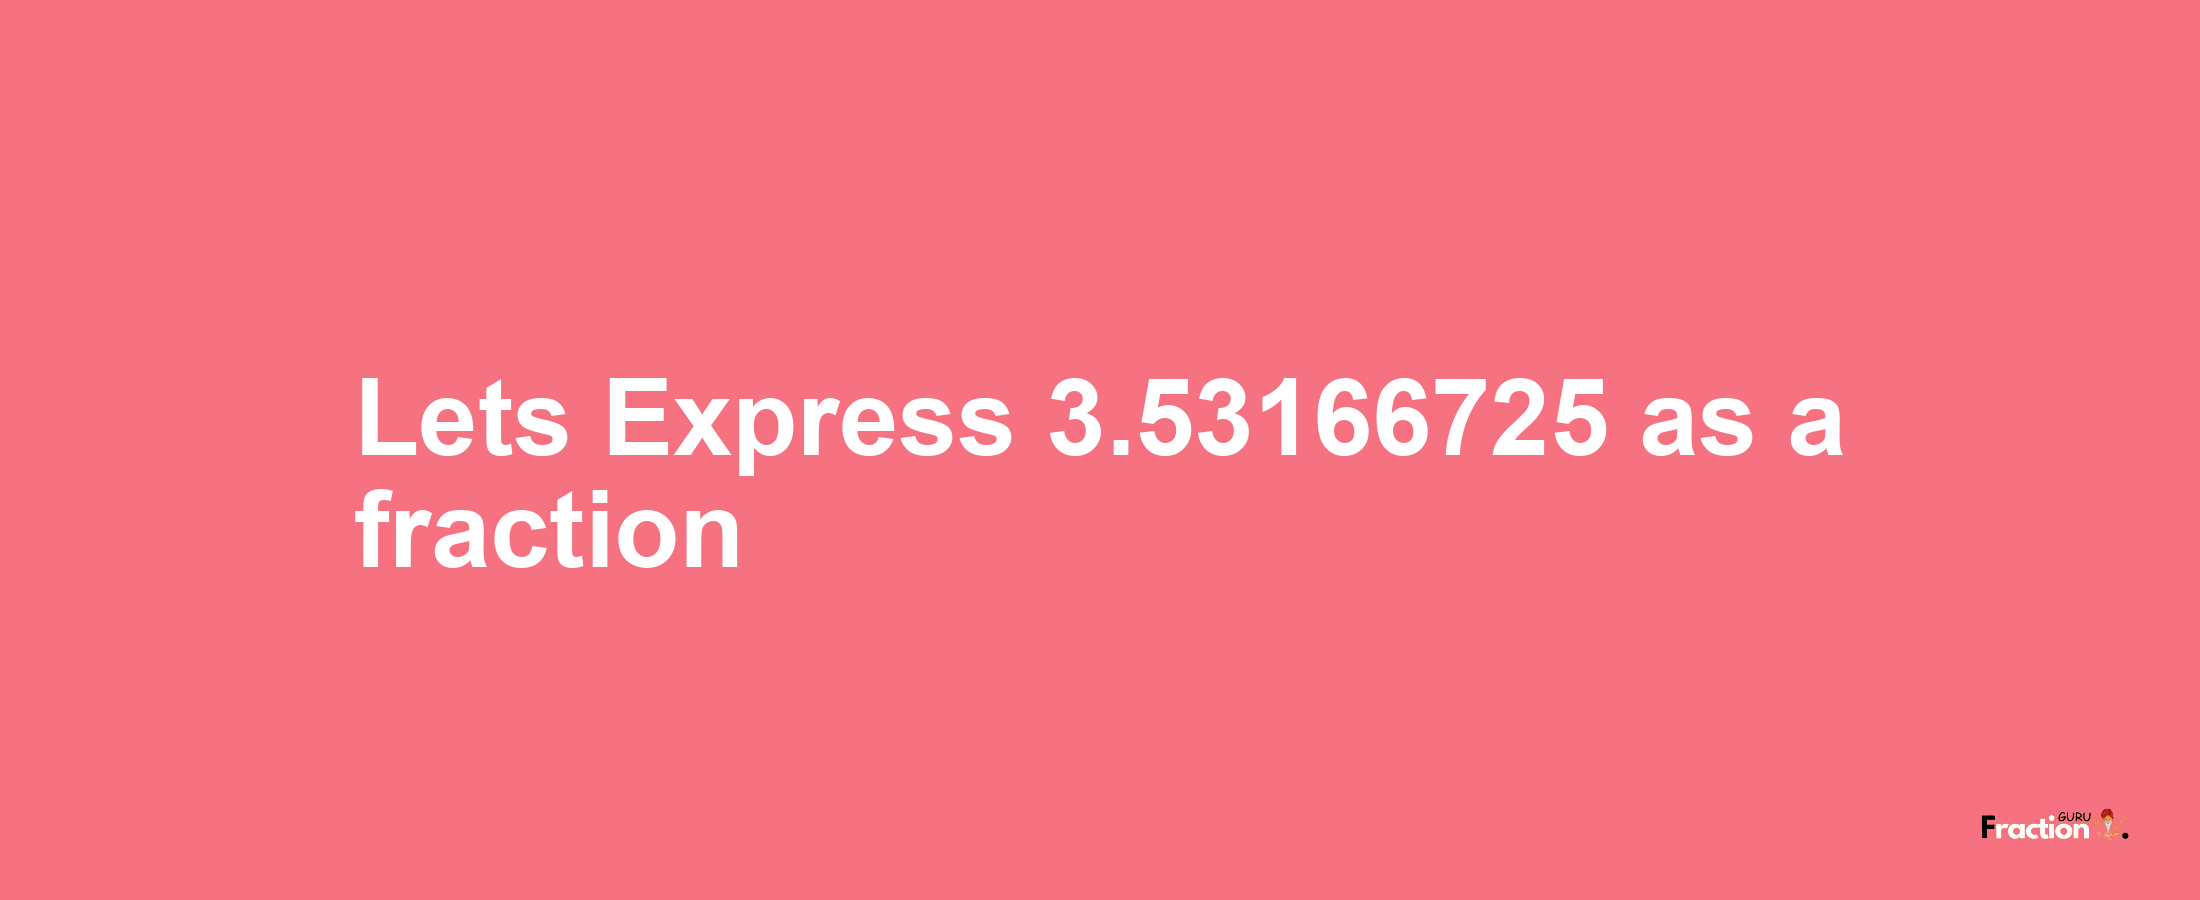 Lets Express 3.53166725 as afraction